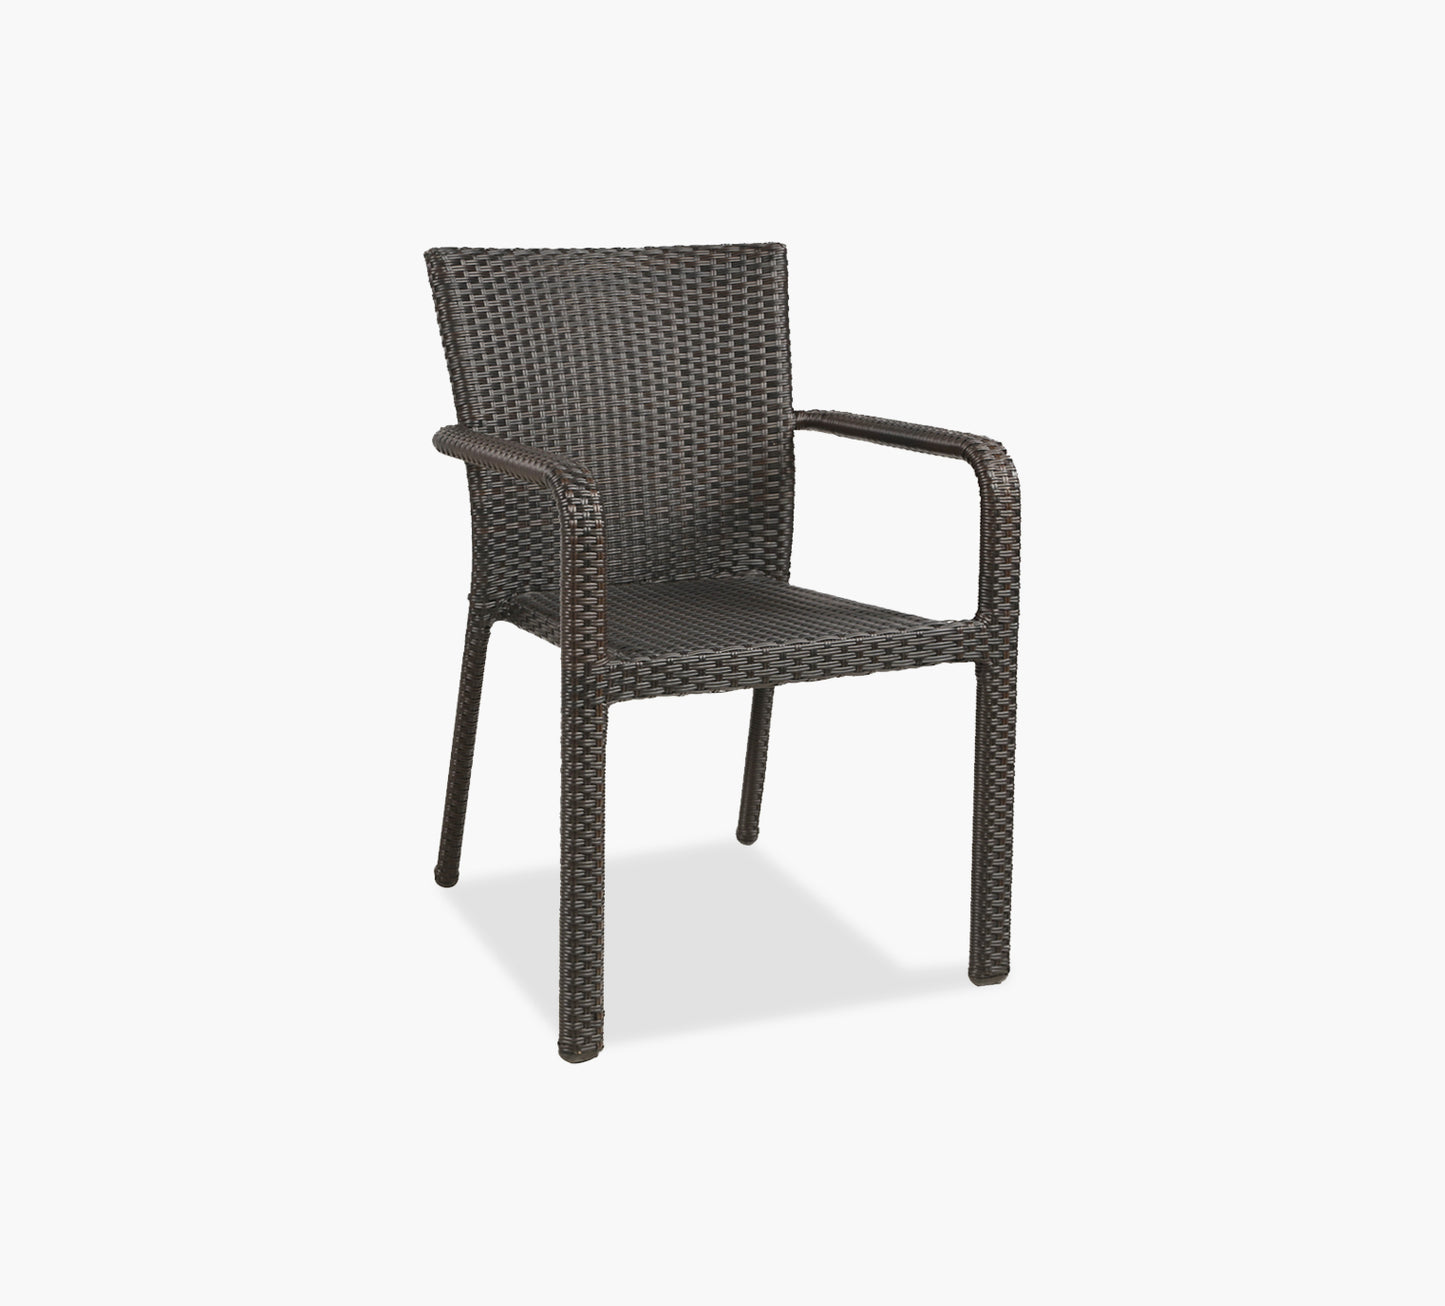 Coco Bistro Outdoor Stacking Dining Chair